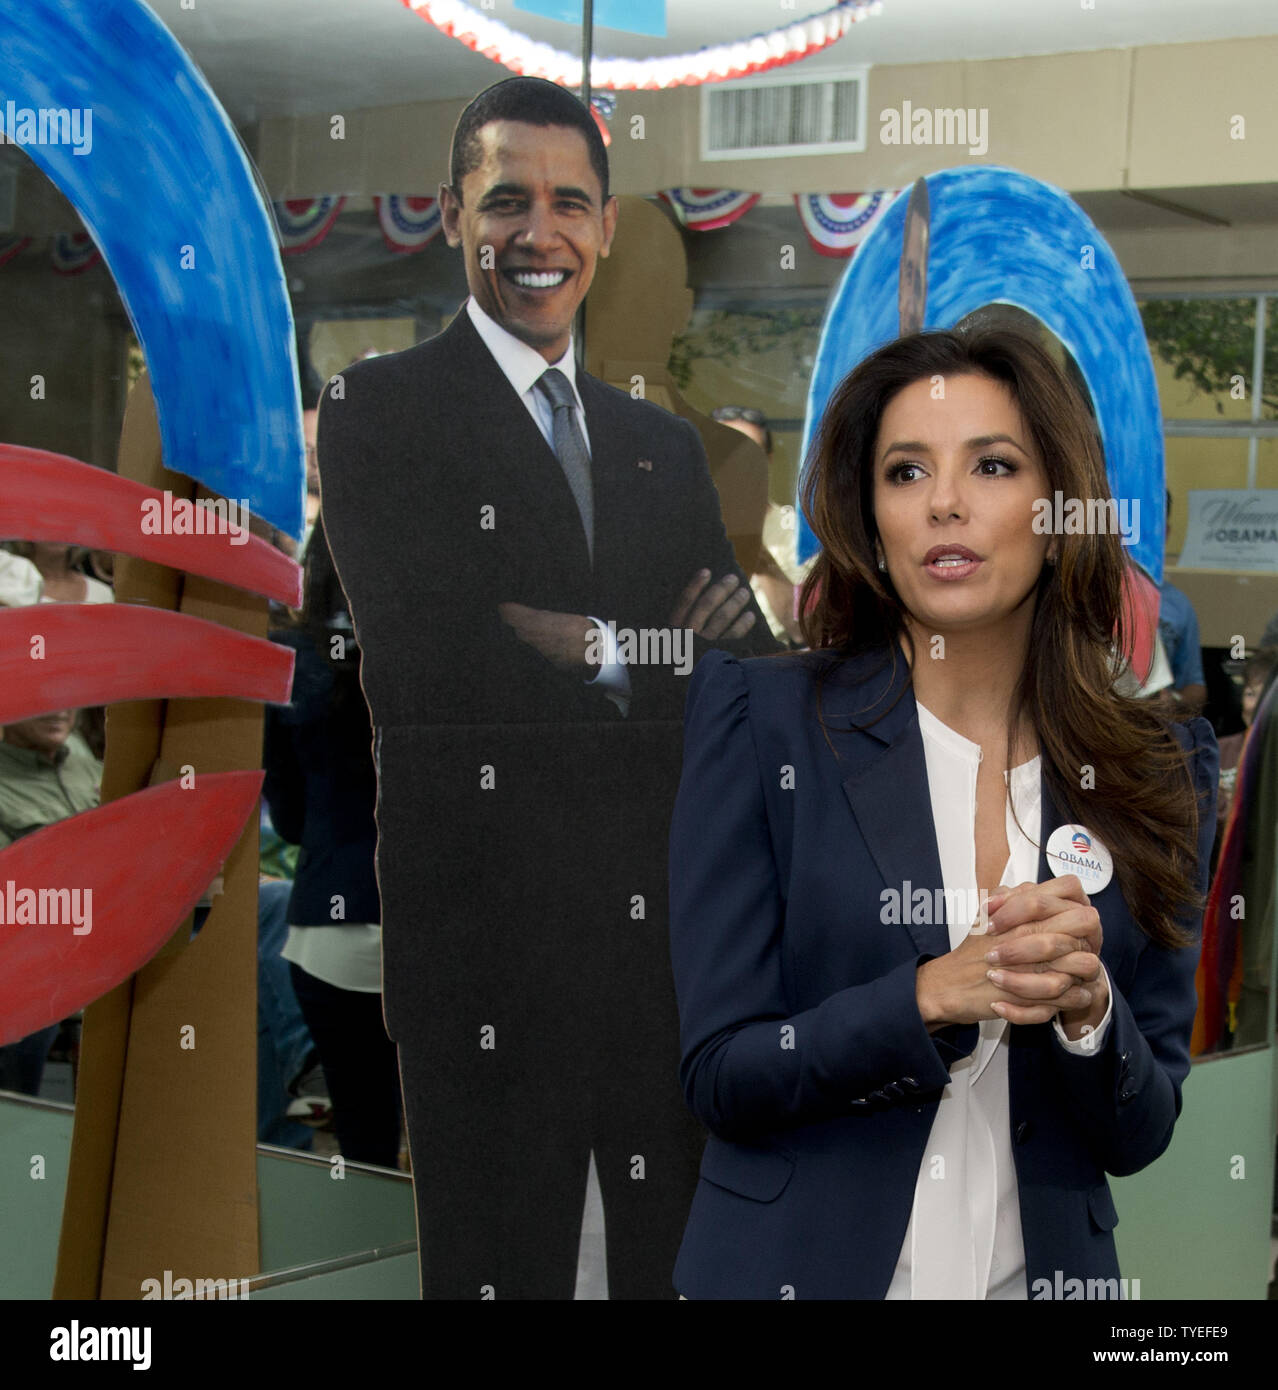 Eva Longoria talks to Obama supporters at the  West Palm Beach Florida, field office during the first day of early voting in Florida, October 27, 2012. Floridians can early vote starting Saturday October 27 through November 3, 2012  from 7A.M. to 7P.M. daily. UPI/Gary I Rothstein. Stock Photo